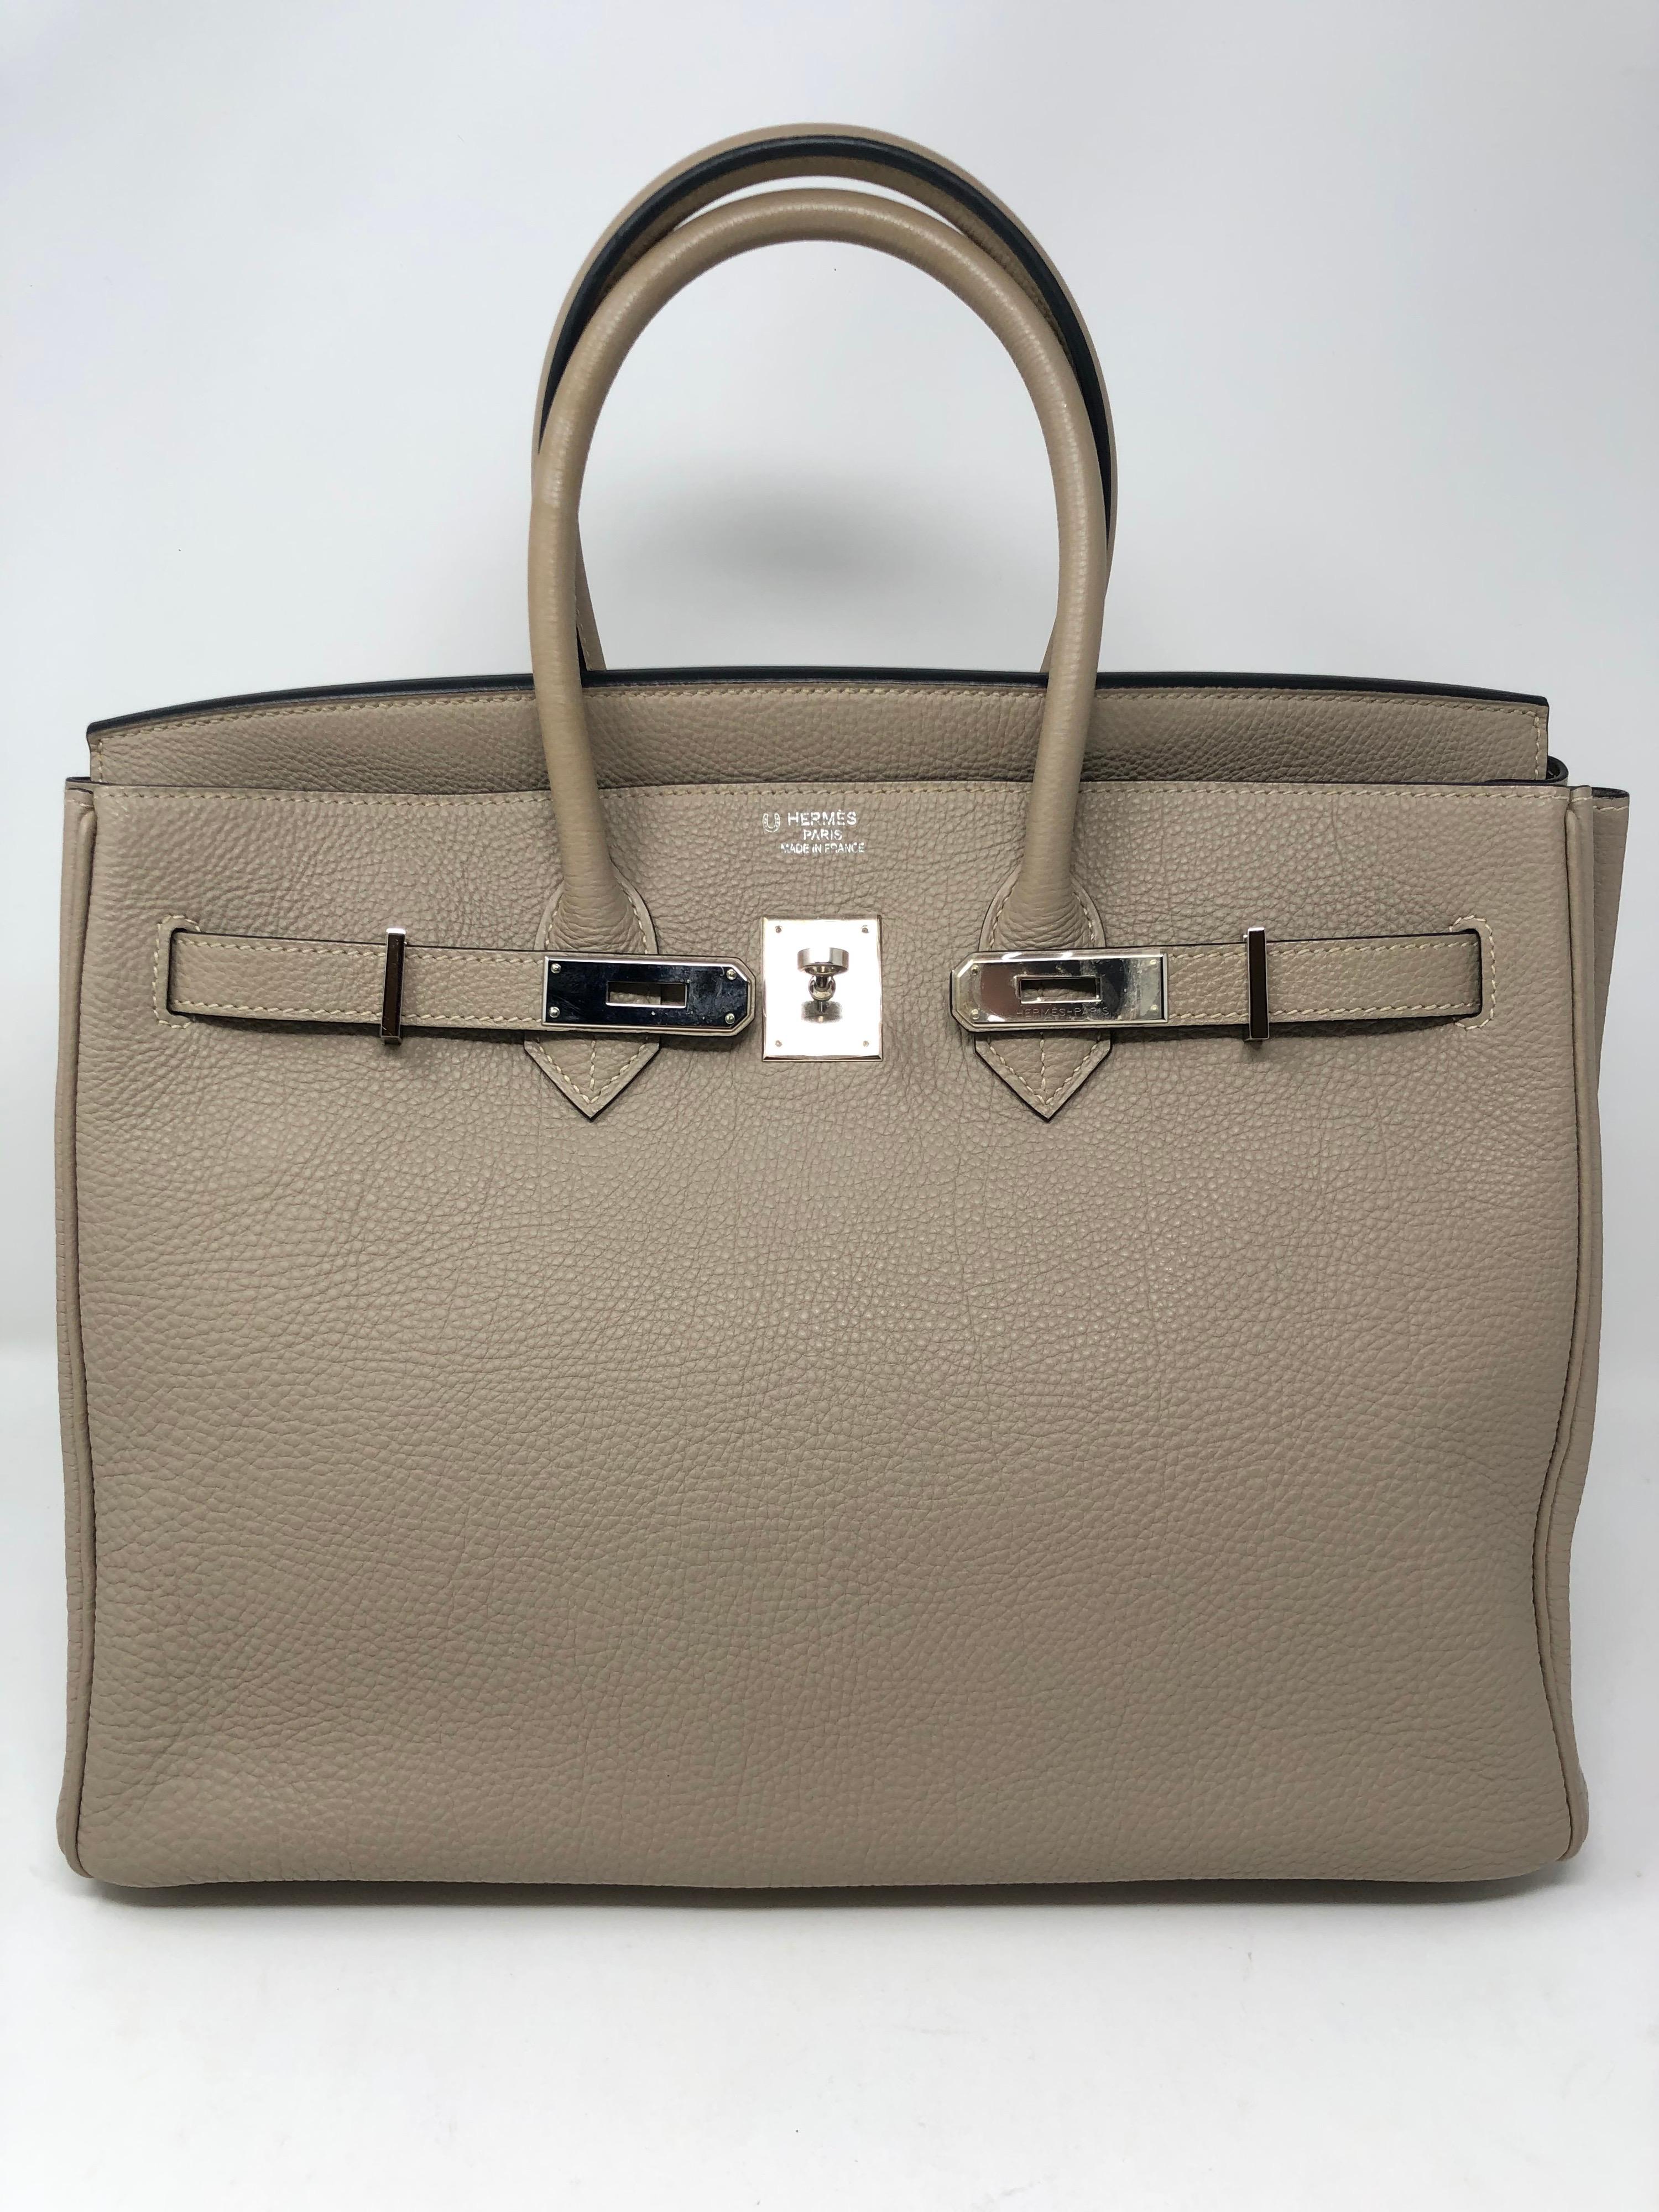 Hermes Birkin 35 Gris Tourterelle /Etoupe. Special Order bag. Exterior is Gris Tourterelle color and interior is Etoupe darker grey color. Togo leather. Palladium hardware. M stamp from 2009. Excellent condition. Most wanted color. Full set with